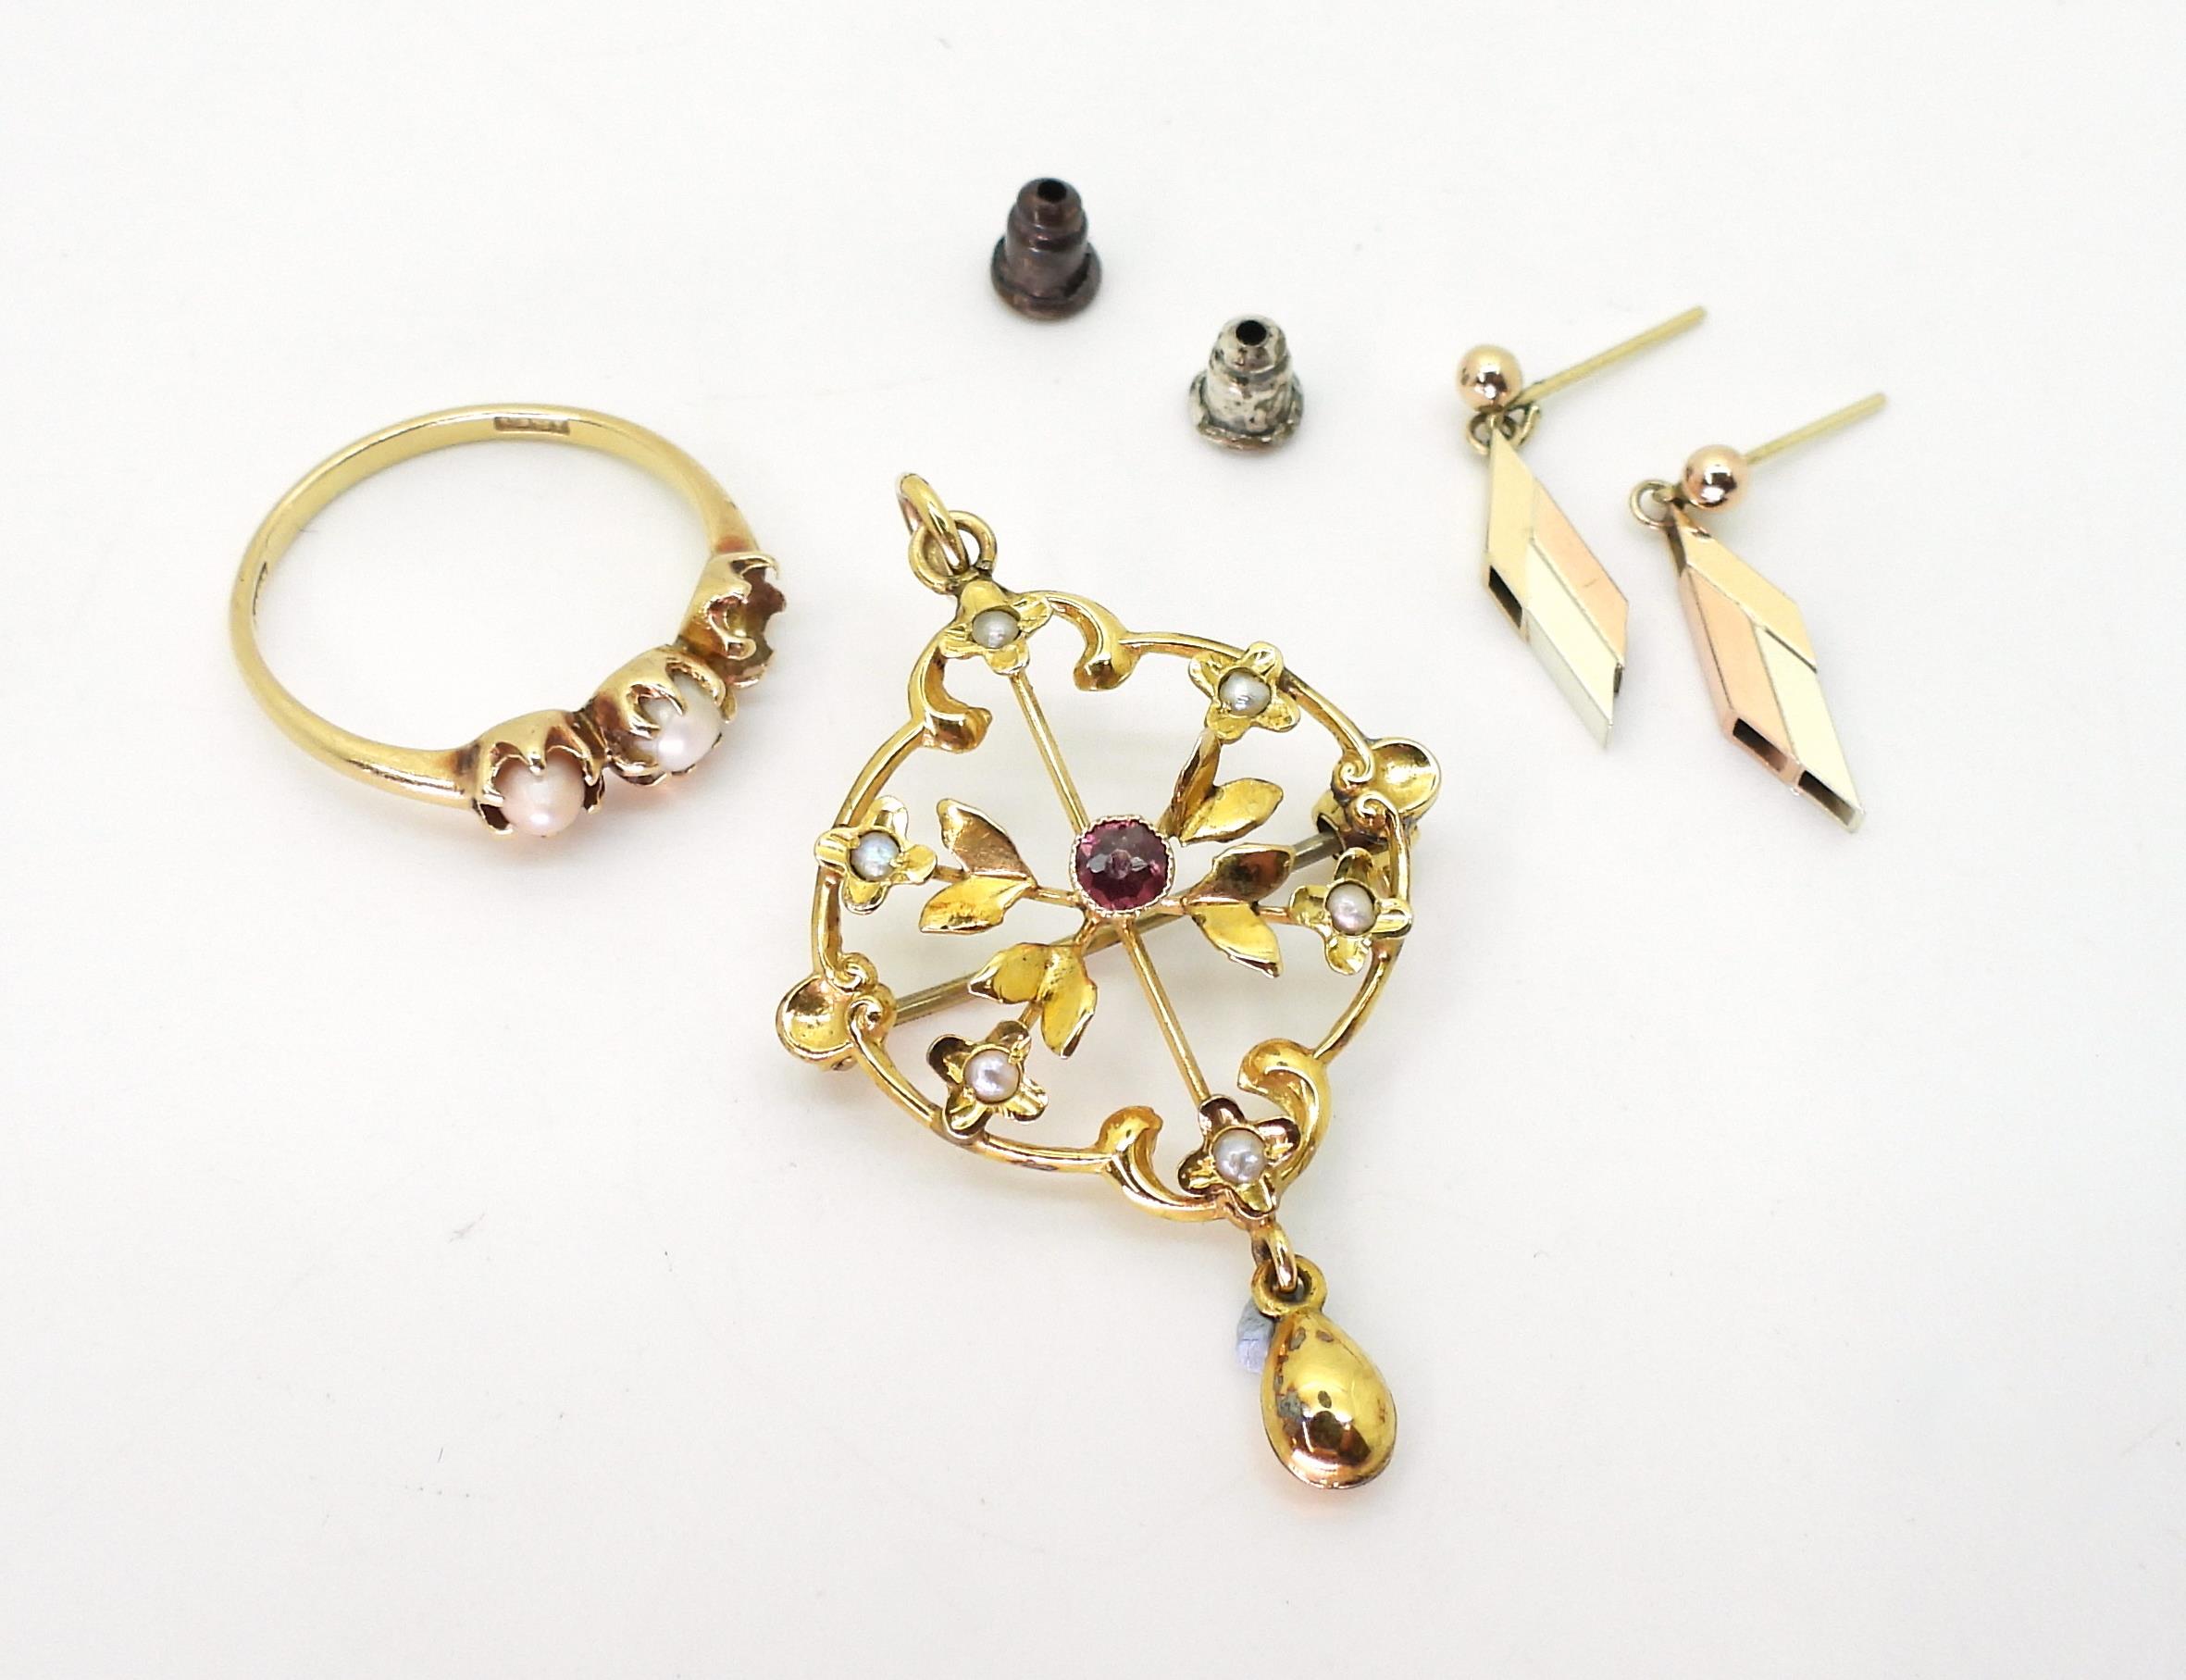 A 9ct gold Edwardian pendant brooch set with seed pearls and a pink gem, length 4.2cm, and a pair of